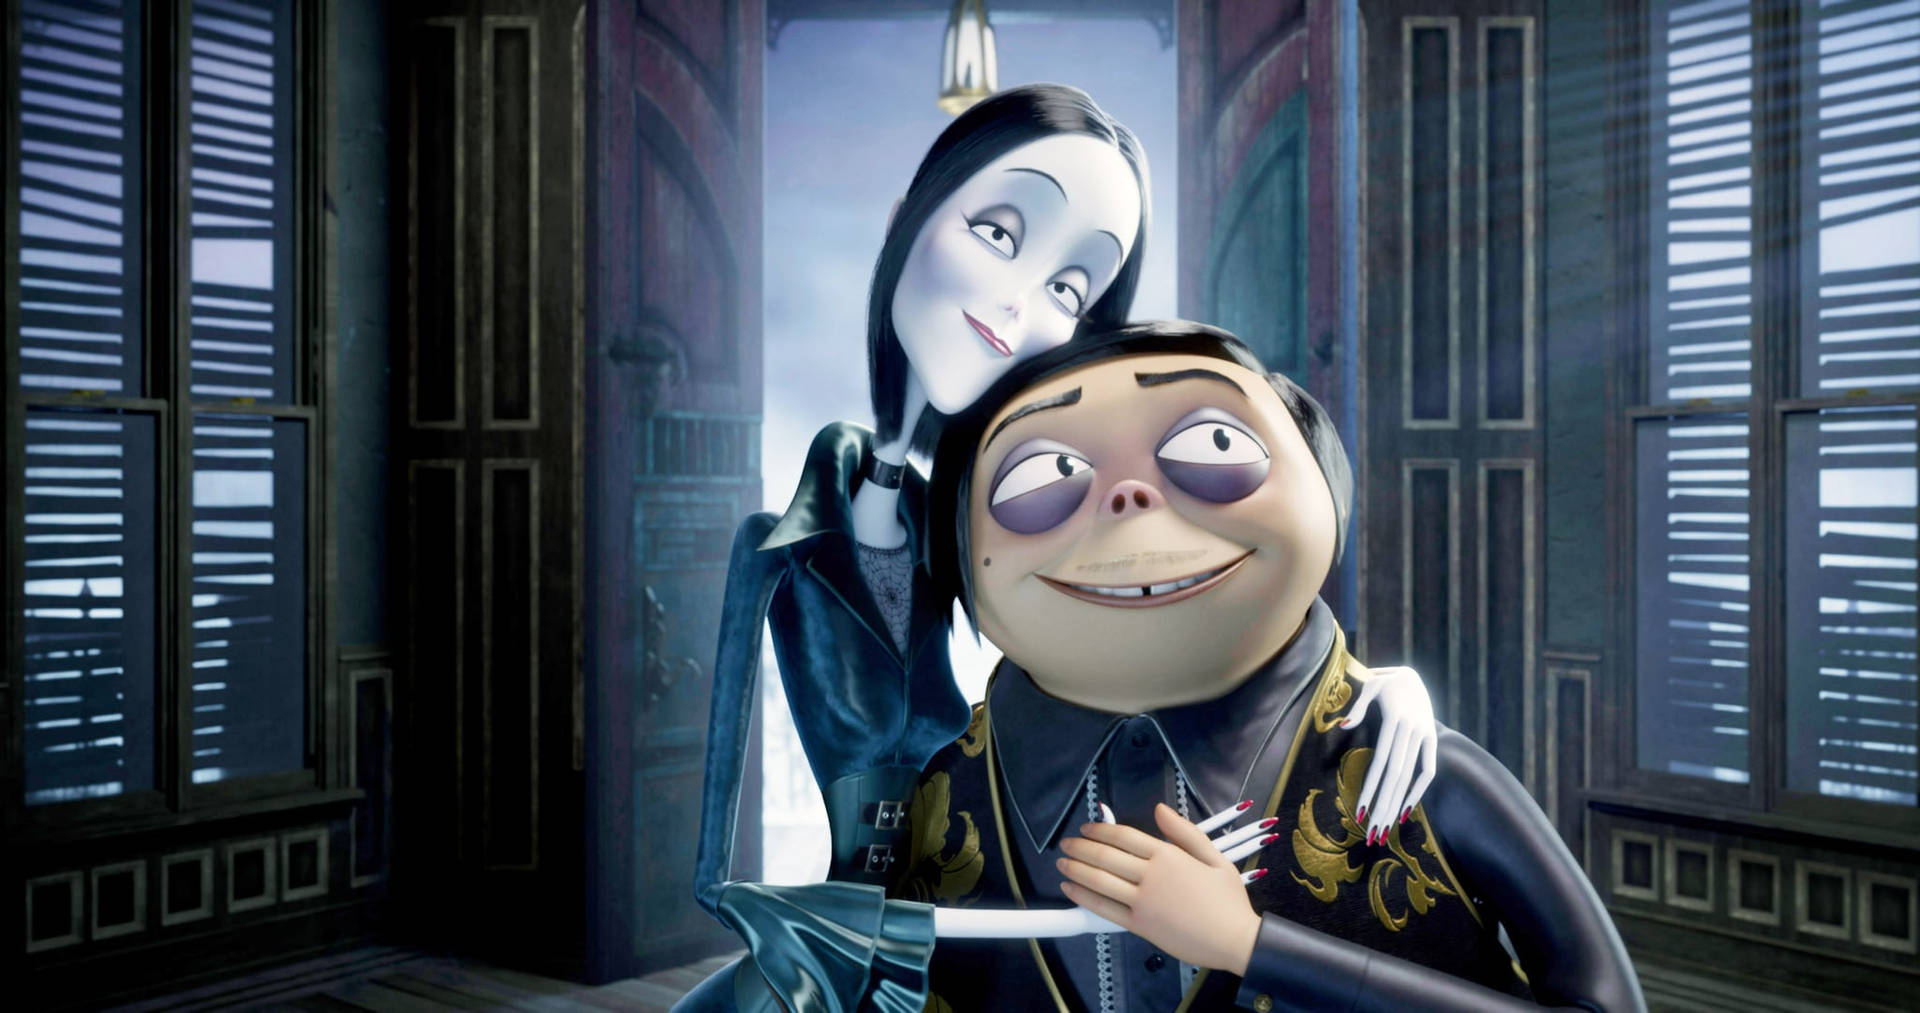 Morticiaund Pugsley Die Addams Family 2 Wallpaper